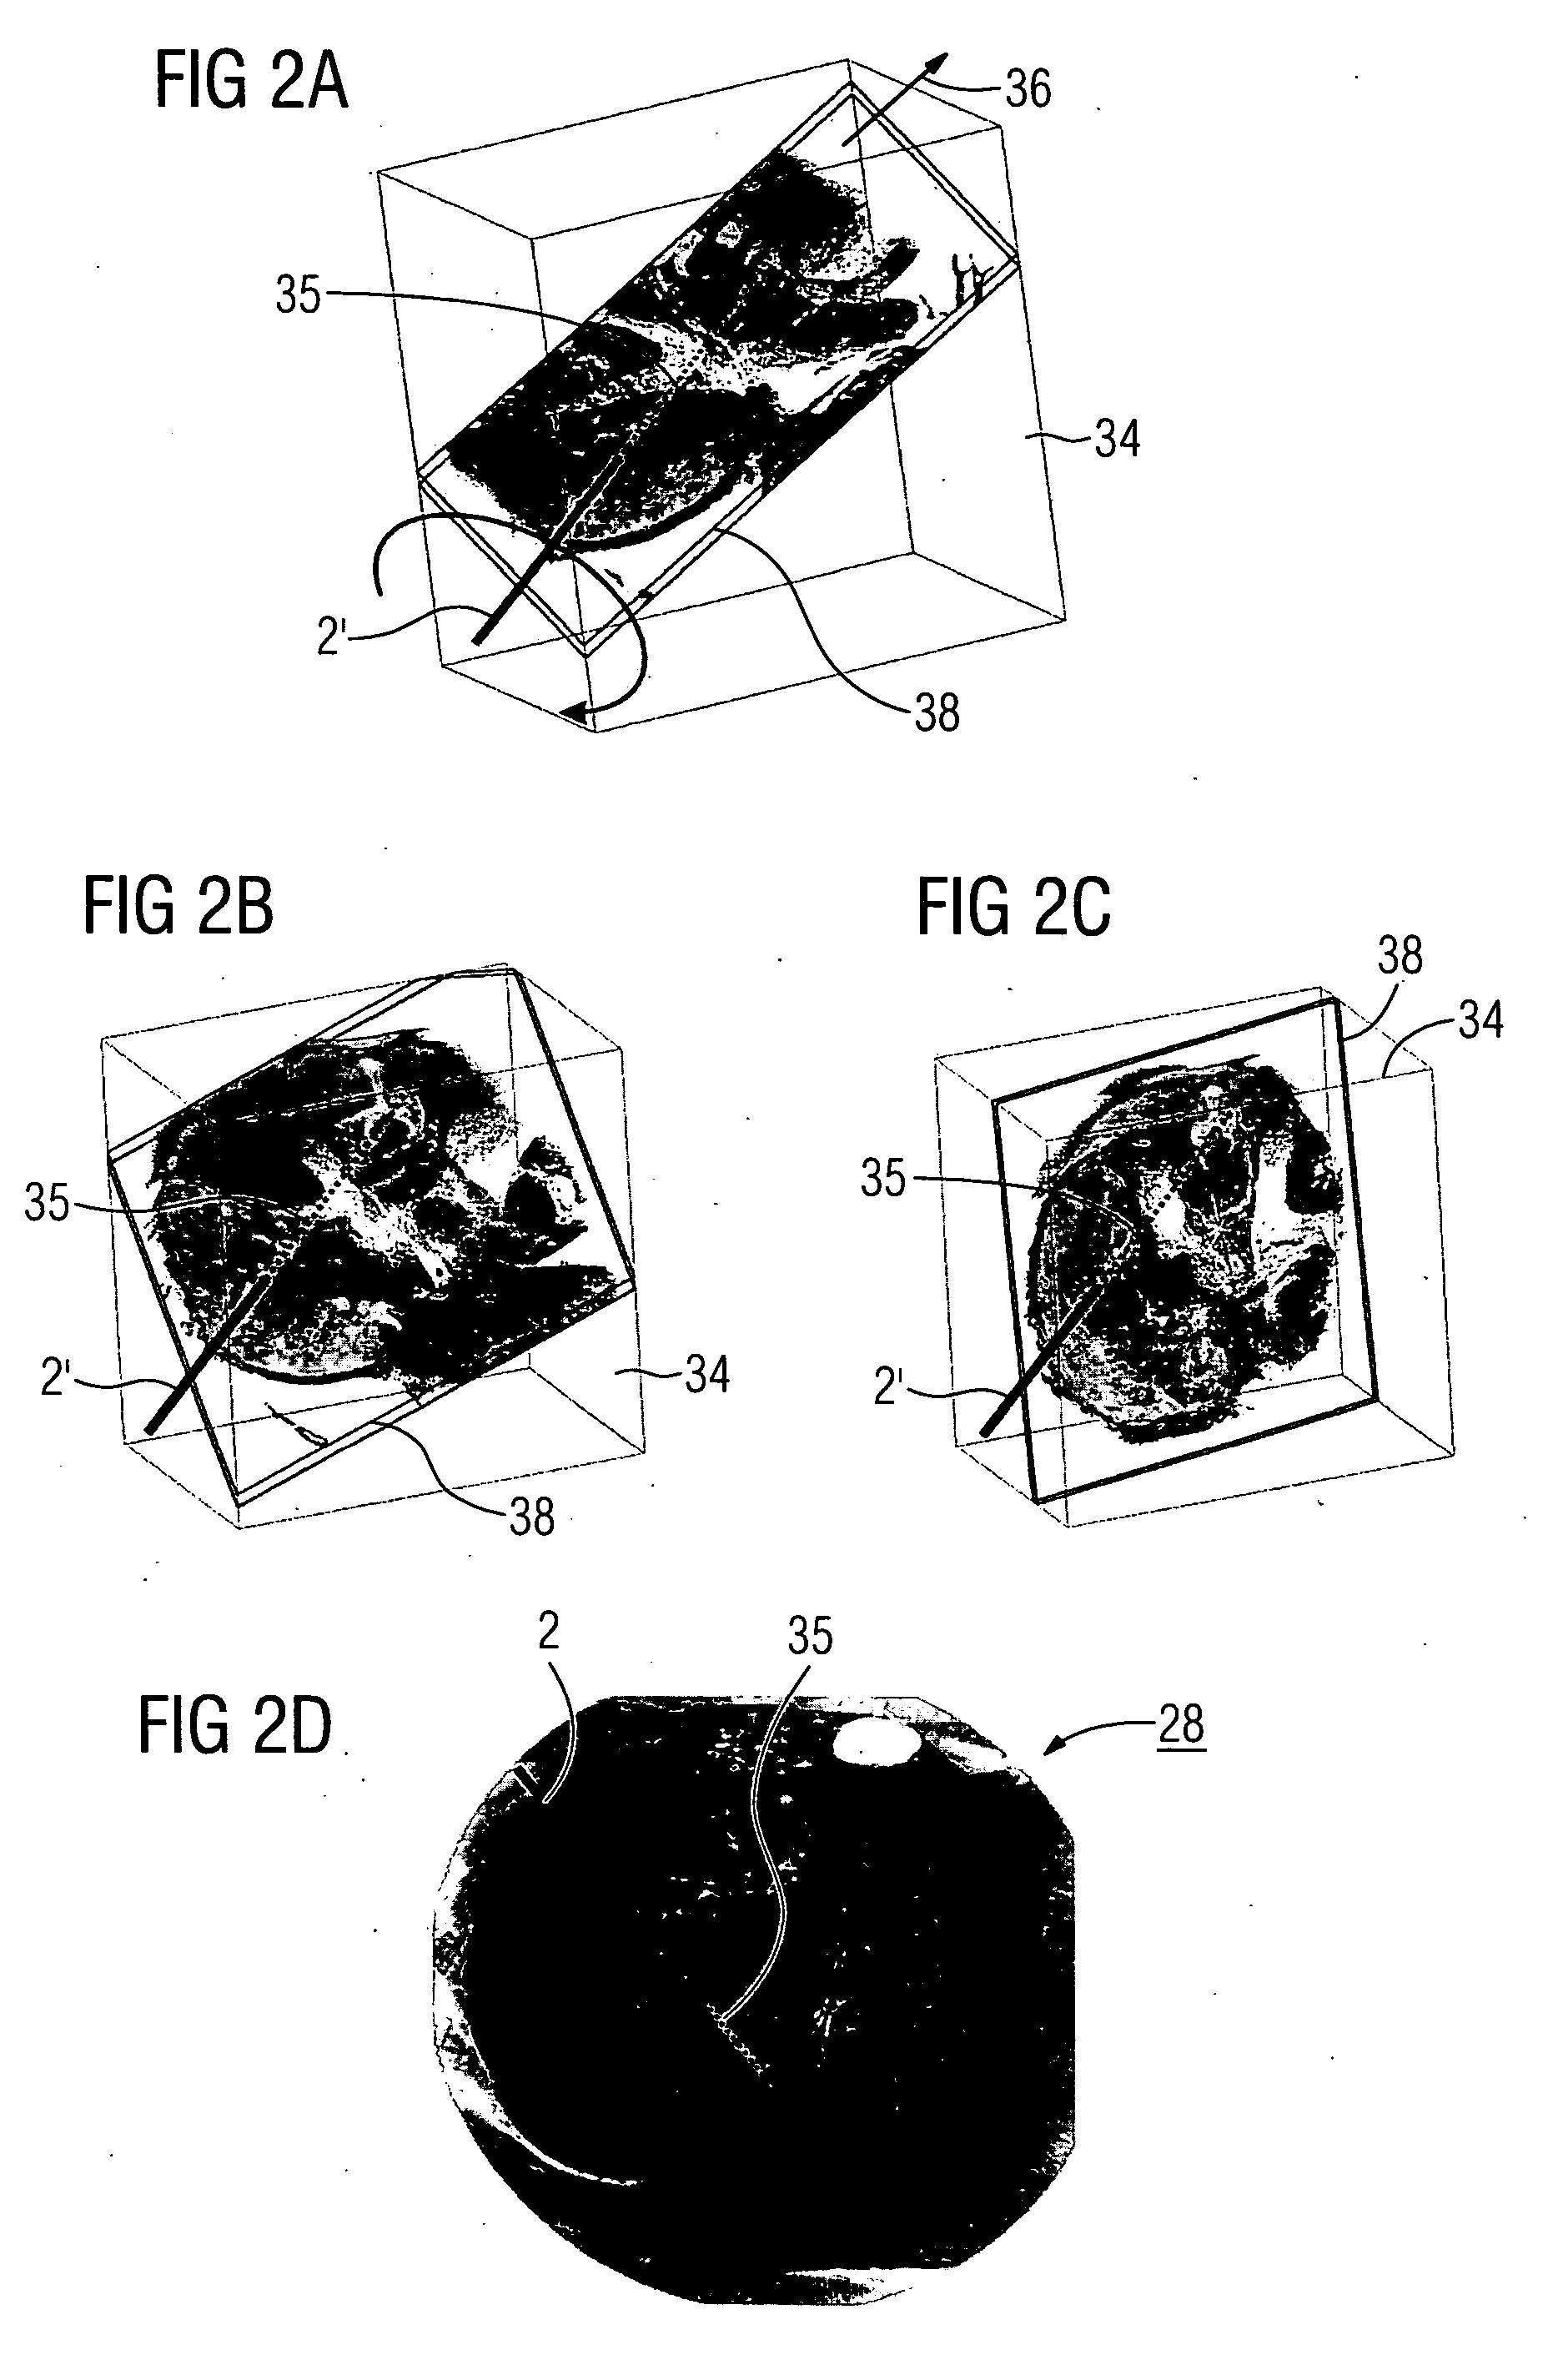 Method for displaying a medical implant in an image and a medical imaging system